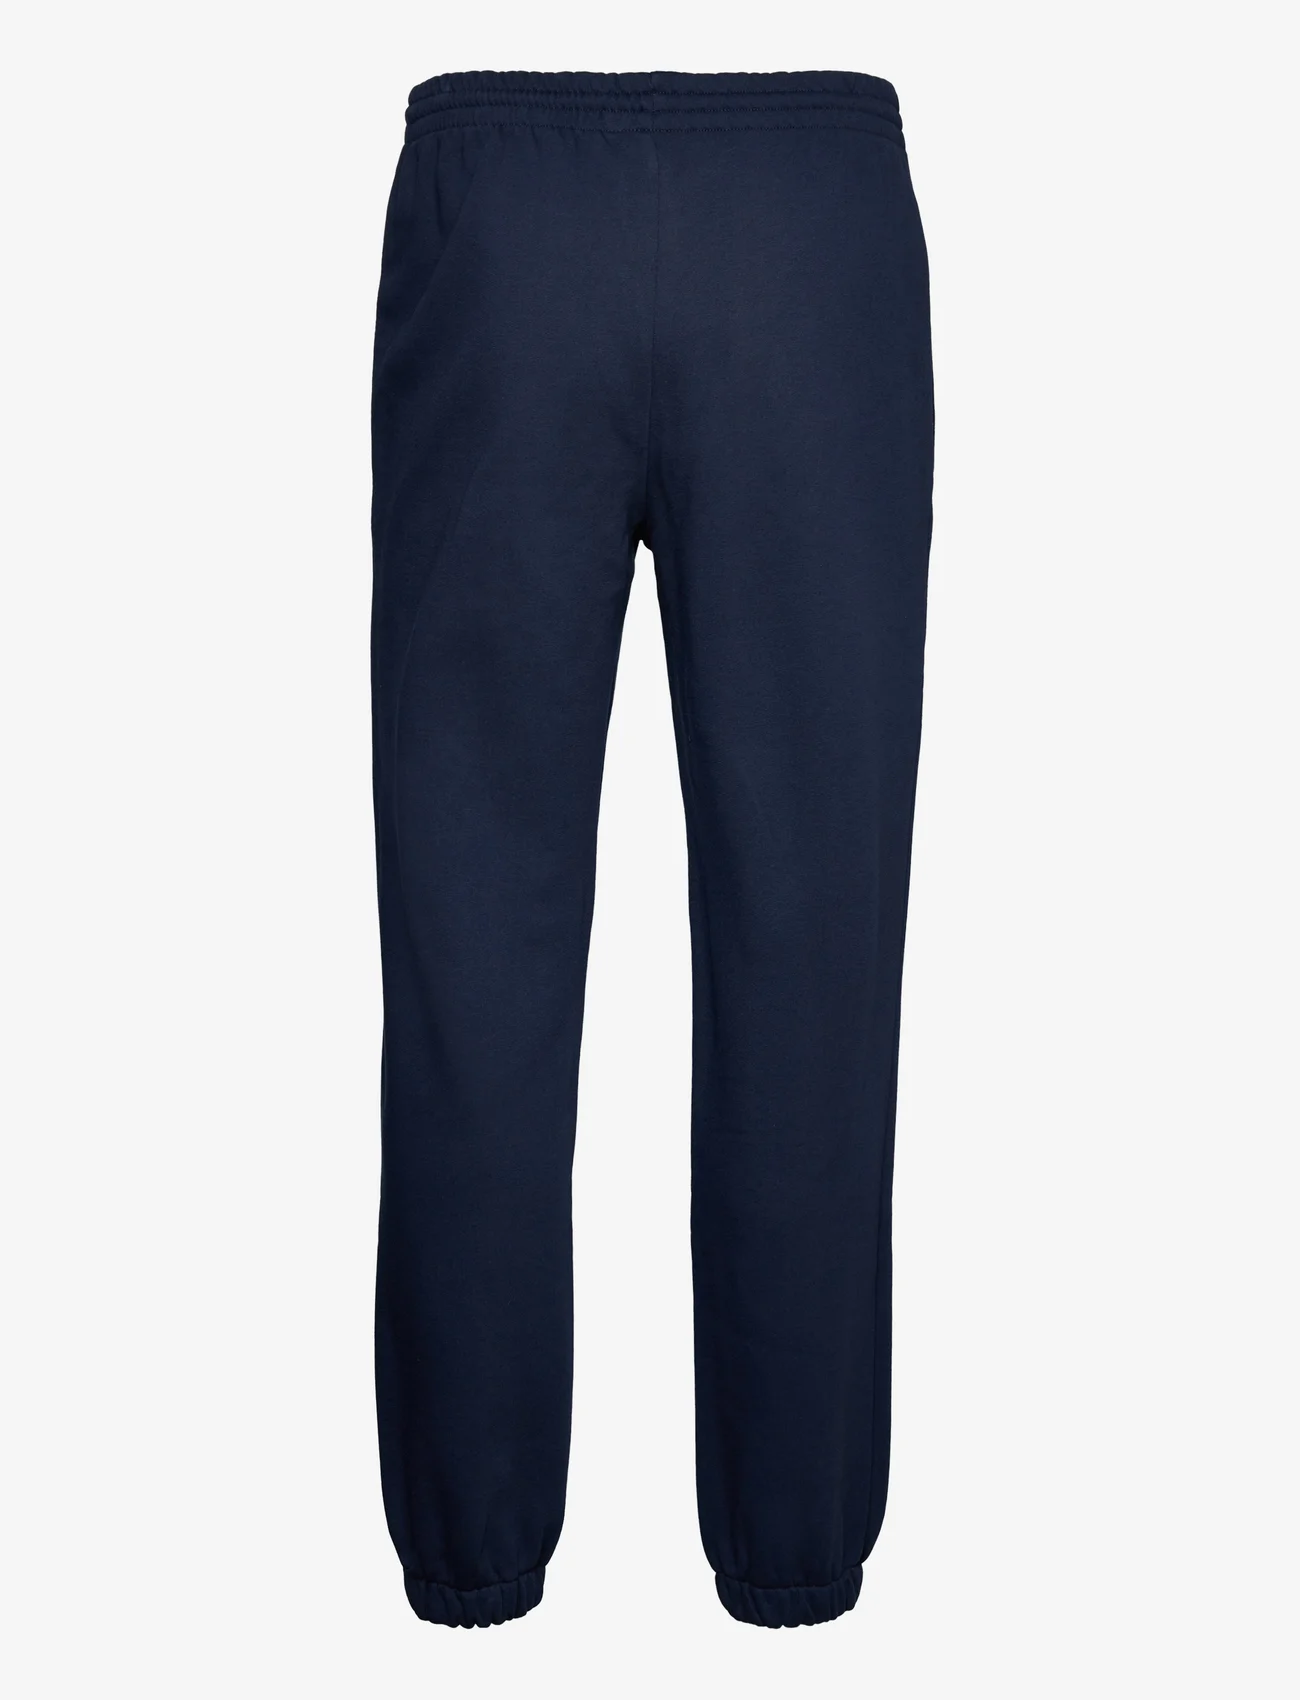 Lacoste - TRACKSUITS & TRACK TR - sweatpants - navy blue - 1